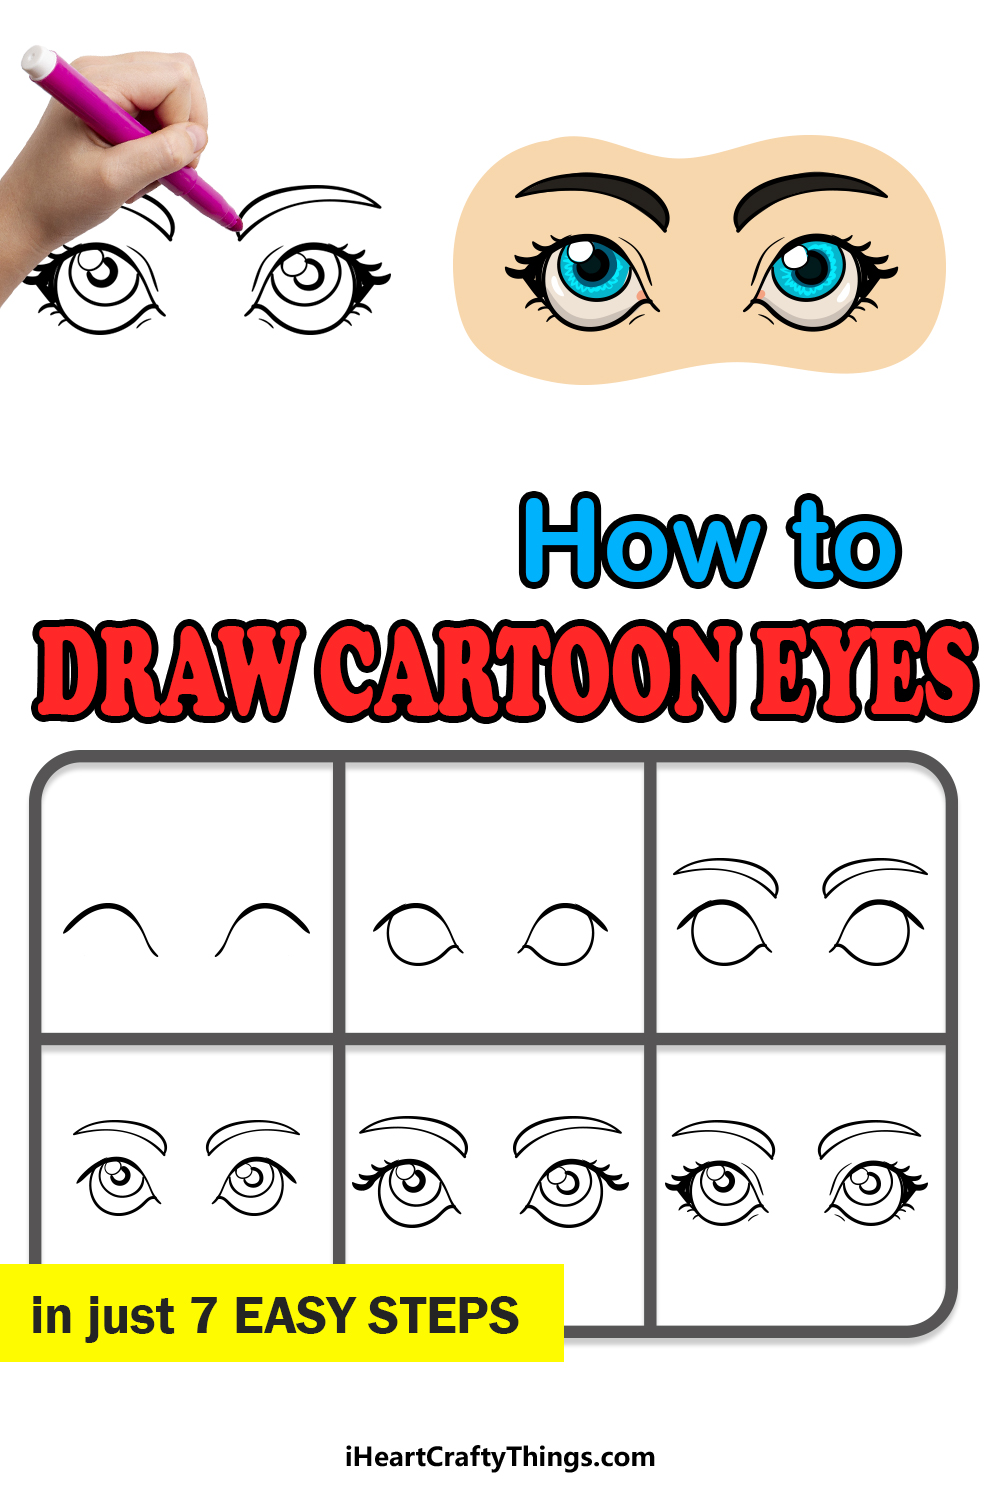 how to draw cartoon eyes in 7 easy steps